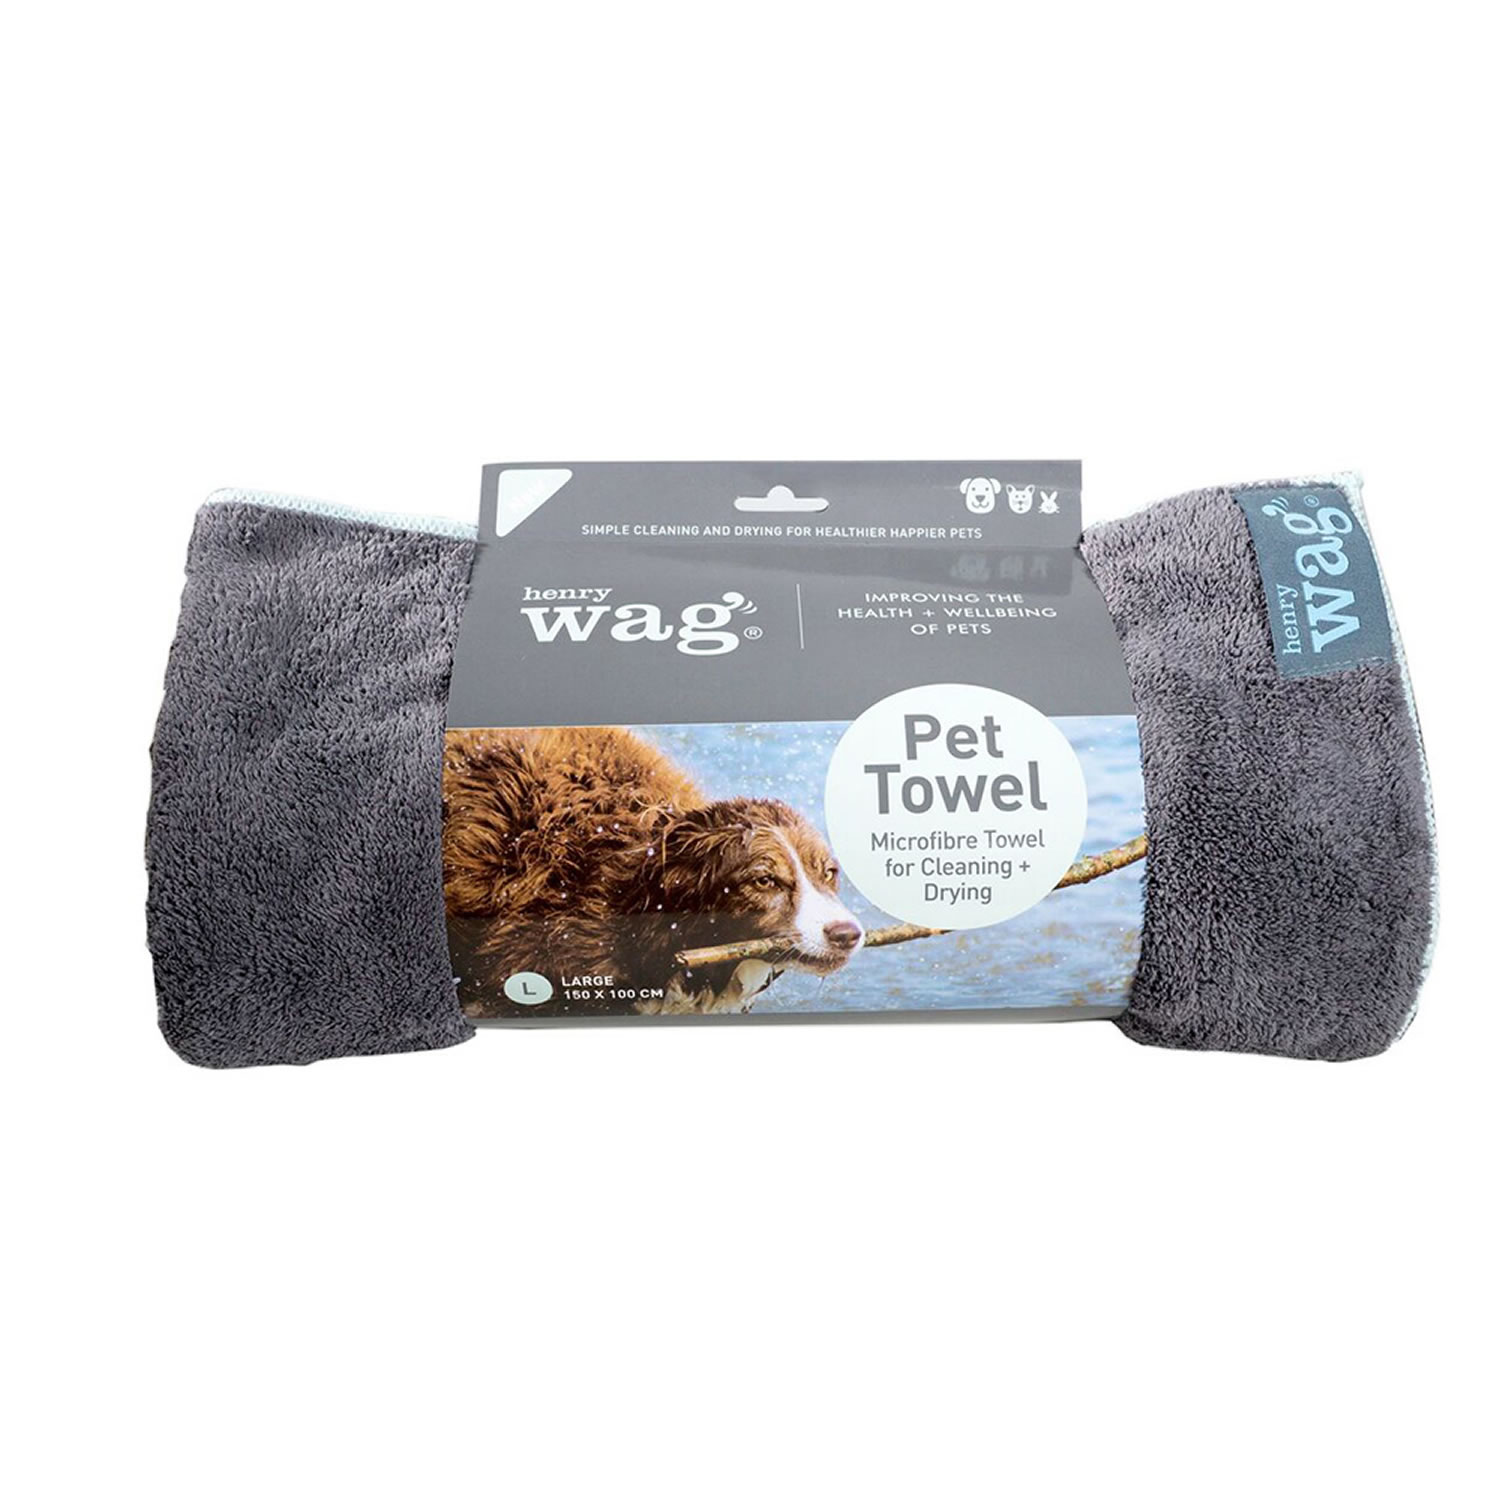 HENRY WAG MICROFIBRE TOWEL SMALL SMALL